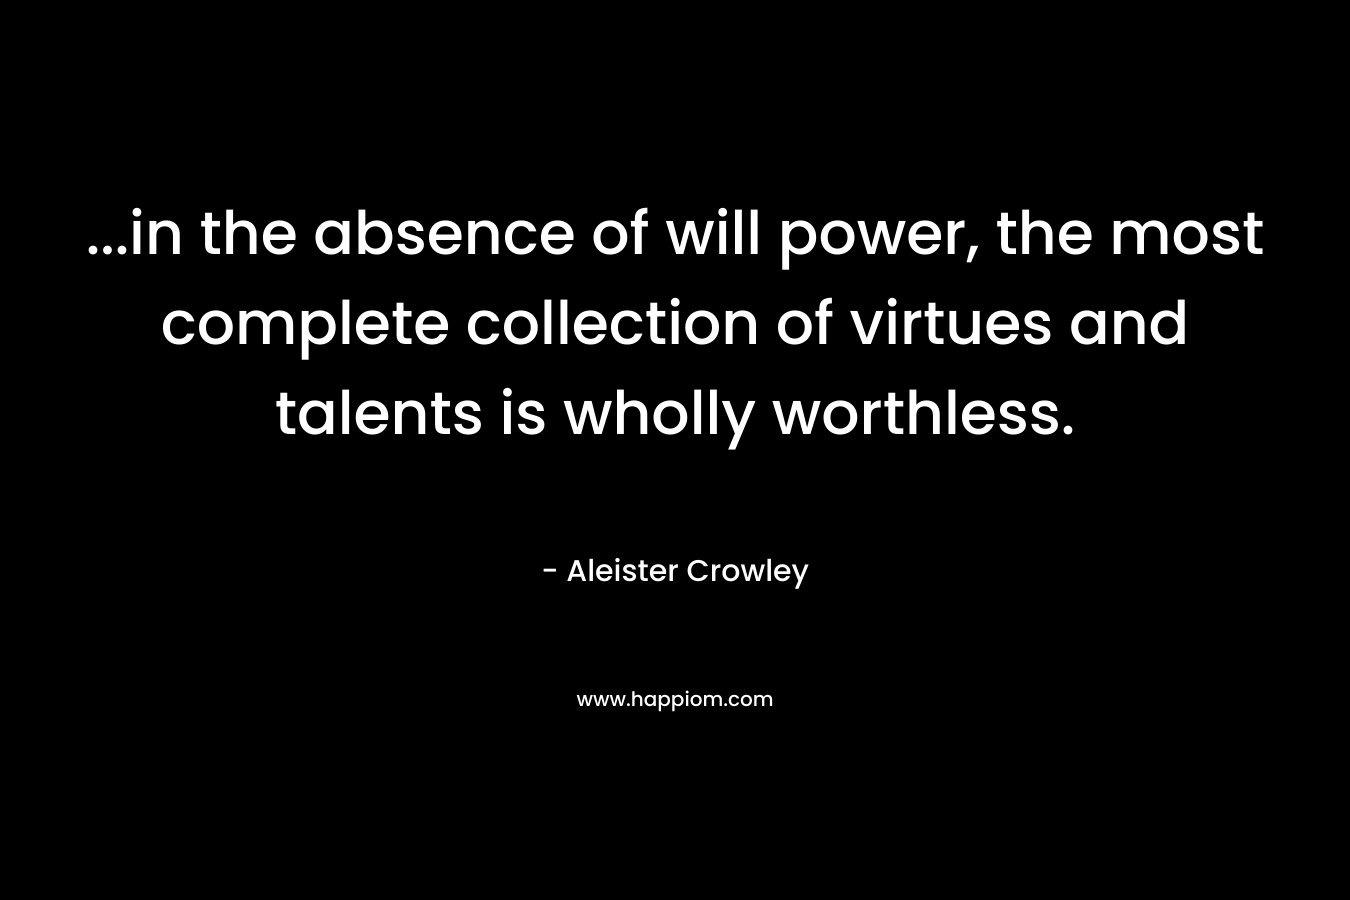 …in the absence of will power, the most complete collection of virtues and talents is wholly worthless. – Aleister Crowley